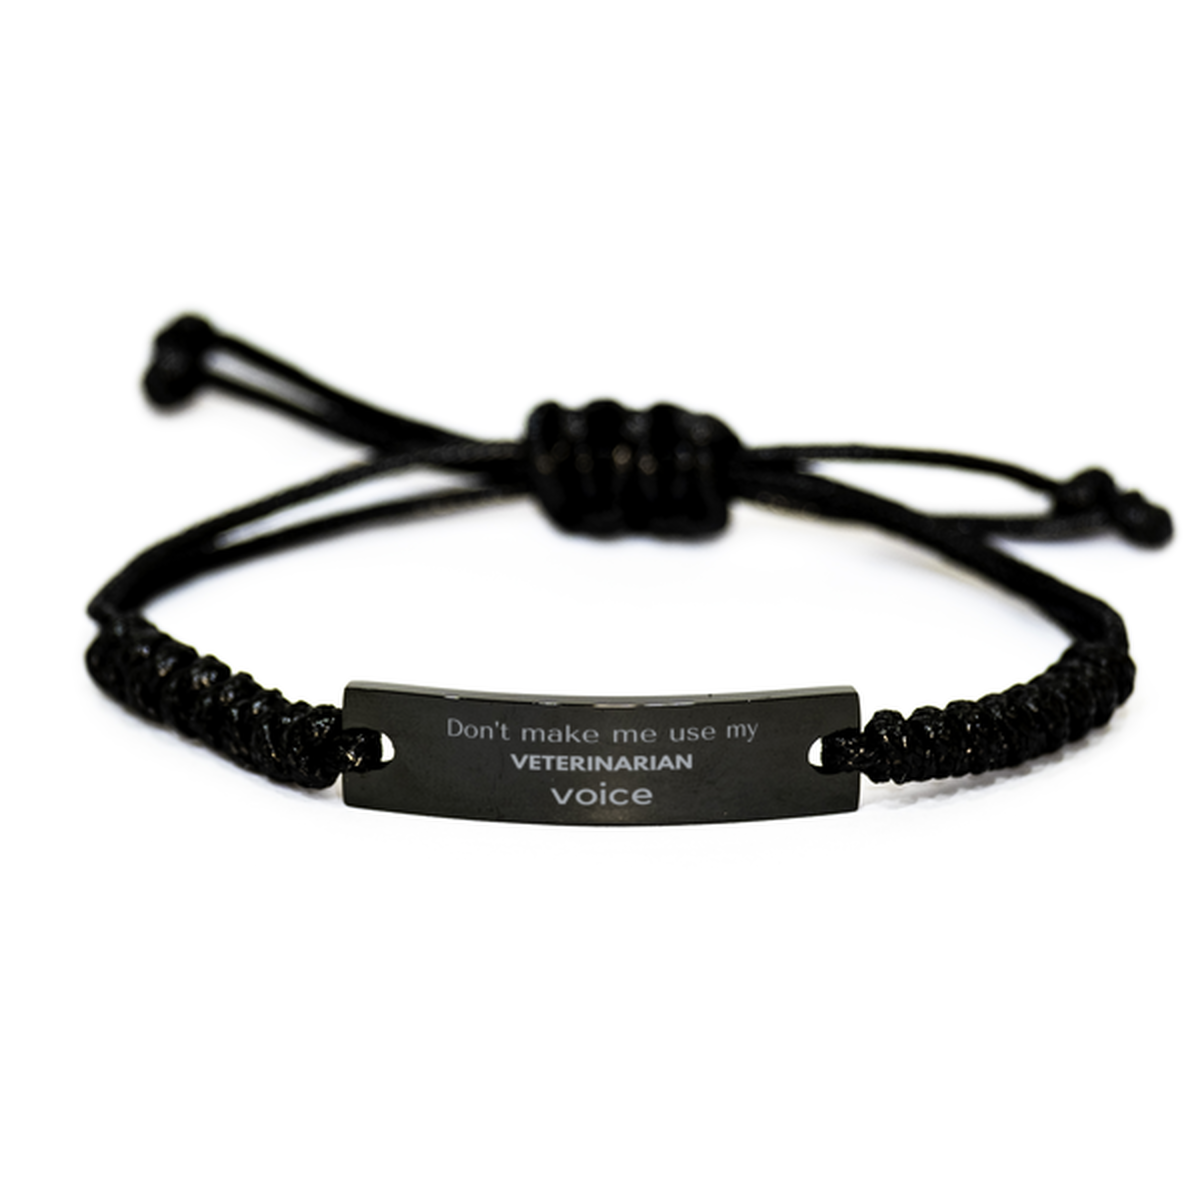 Don't make me use my Veterinarian voice, Sarcasm Veterinarian Gifts, Christmas Veterinarian Black Rope Bracelet Birthday Unique Gifts For Veterinarian Coworkers, Men, Women, Colleague, Friends